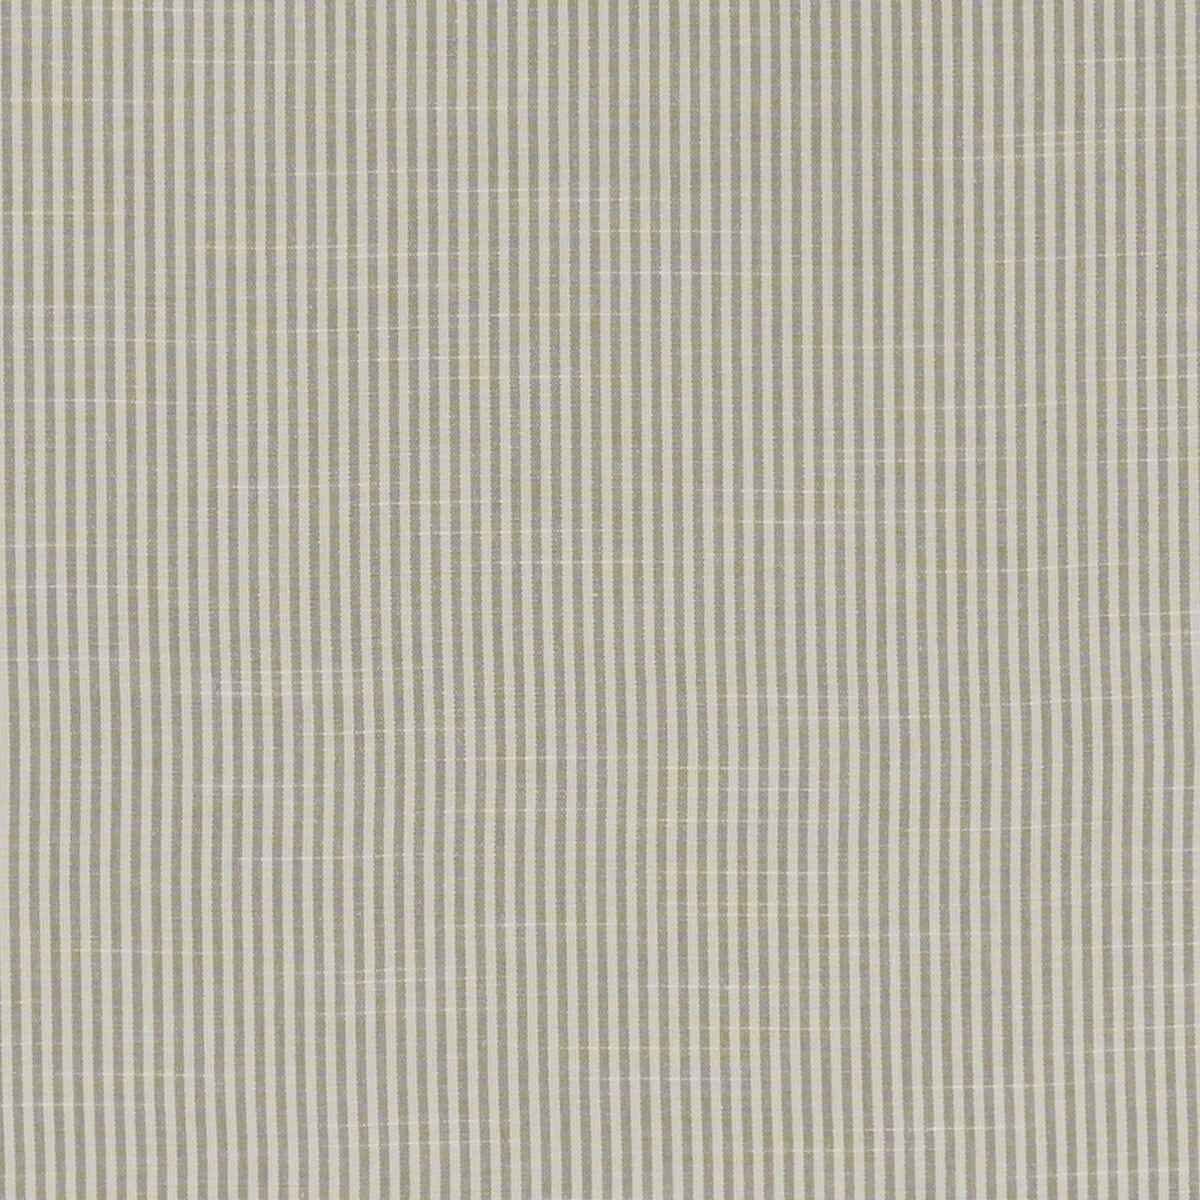 Bempton fabric in grey color - pattern F1307/05.CAC.0 - by Clarke And Clarke in the Bempton By Studio G For C&amp;C collection